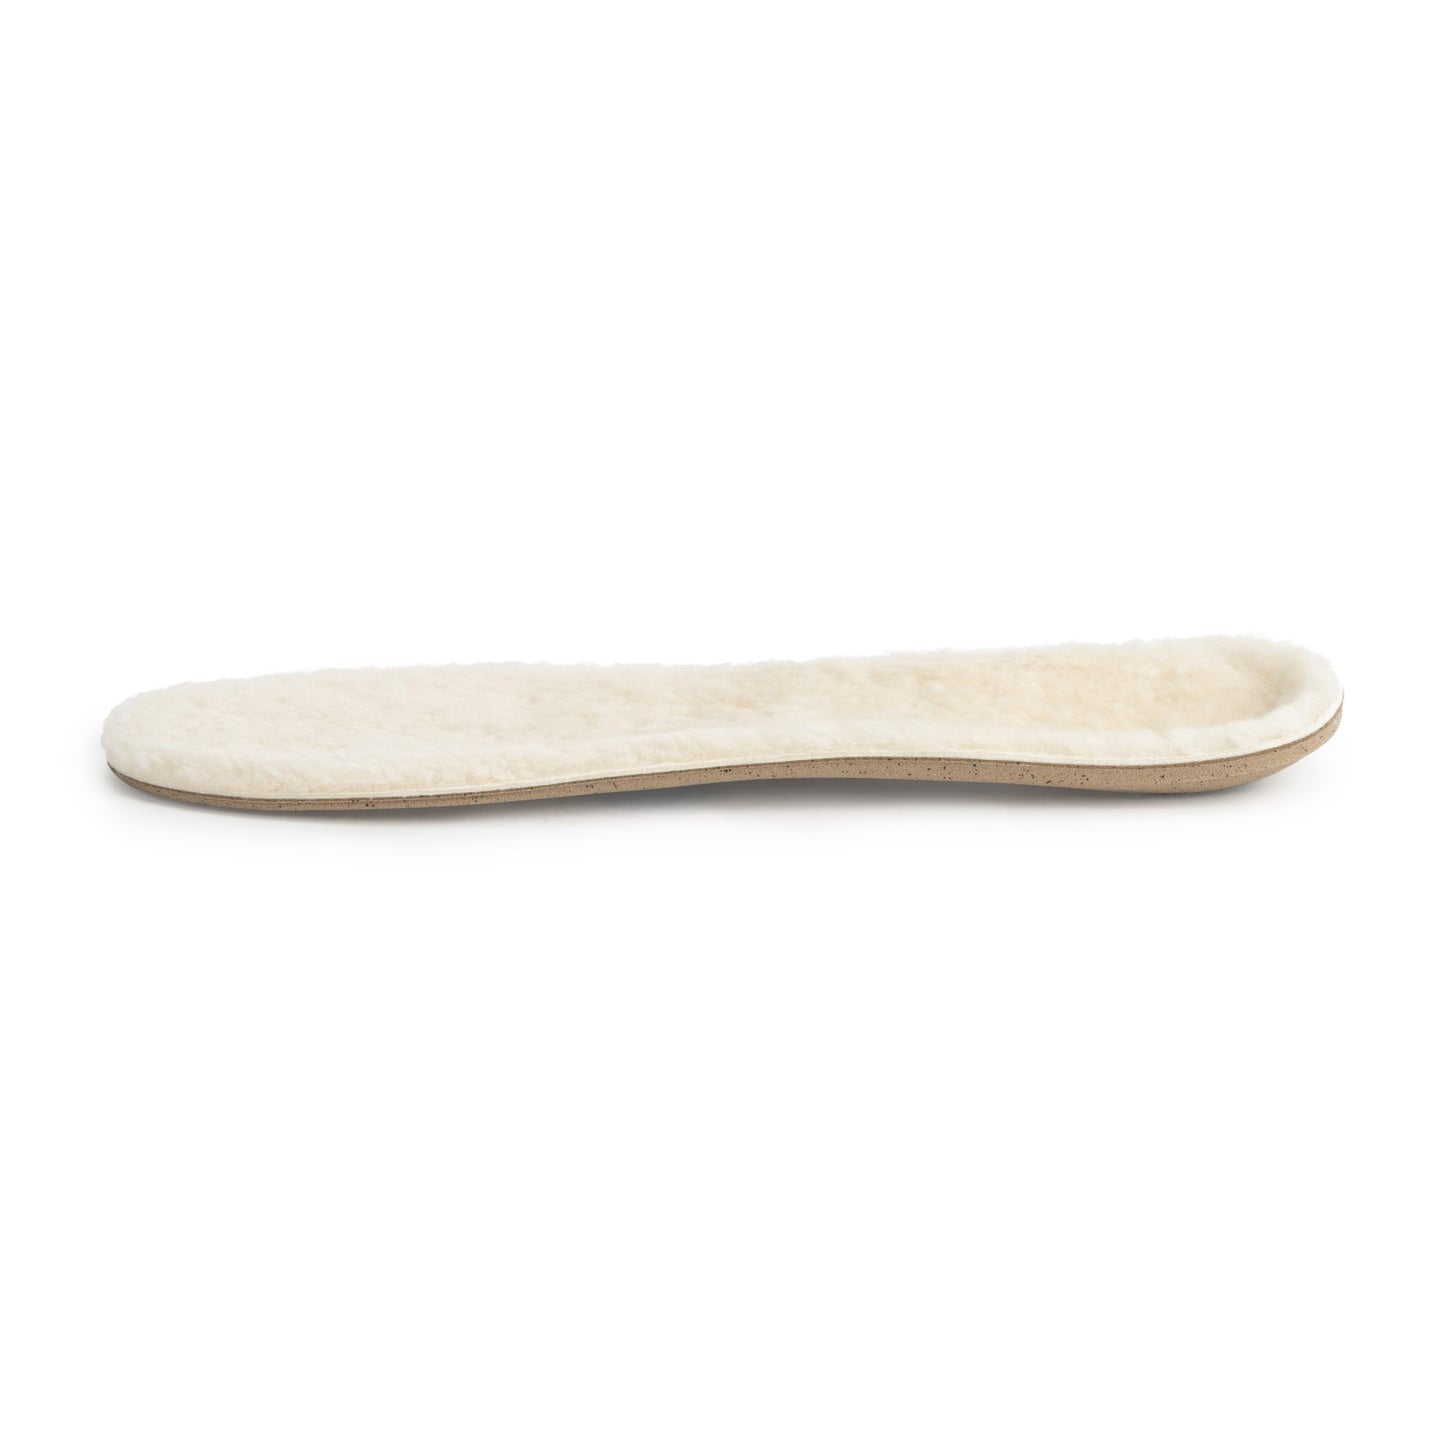 Replacement shearling top covers for orthotics by Tread Labs